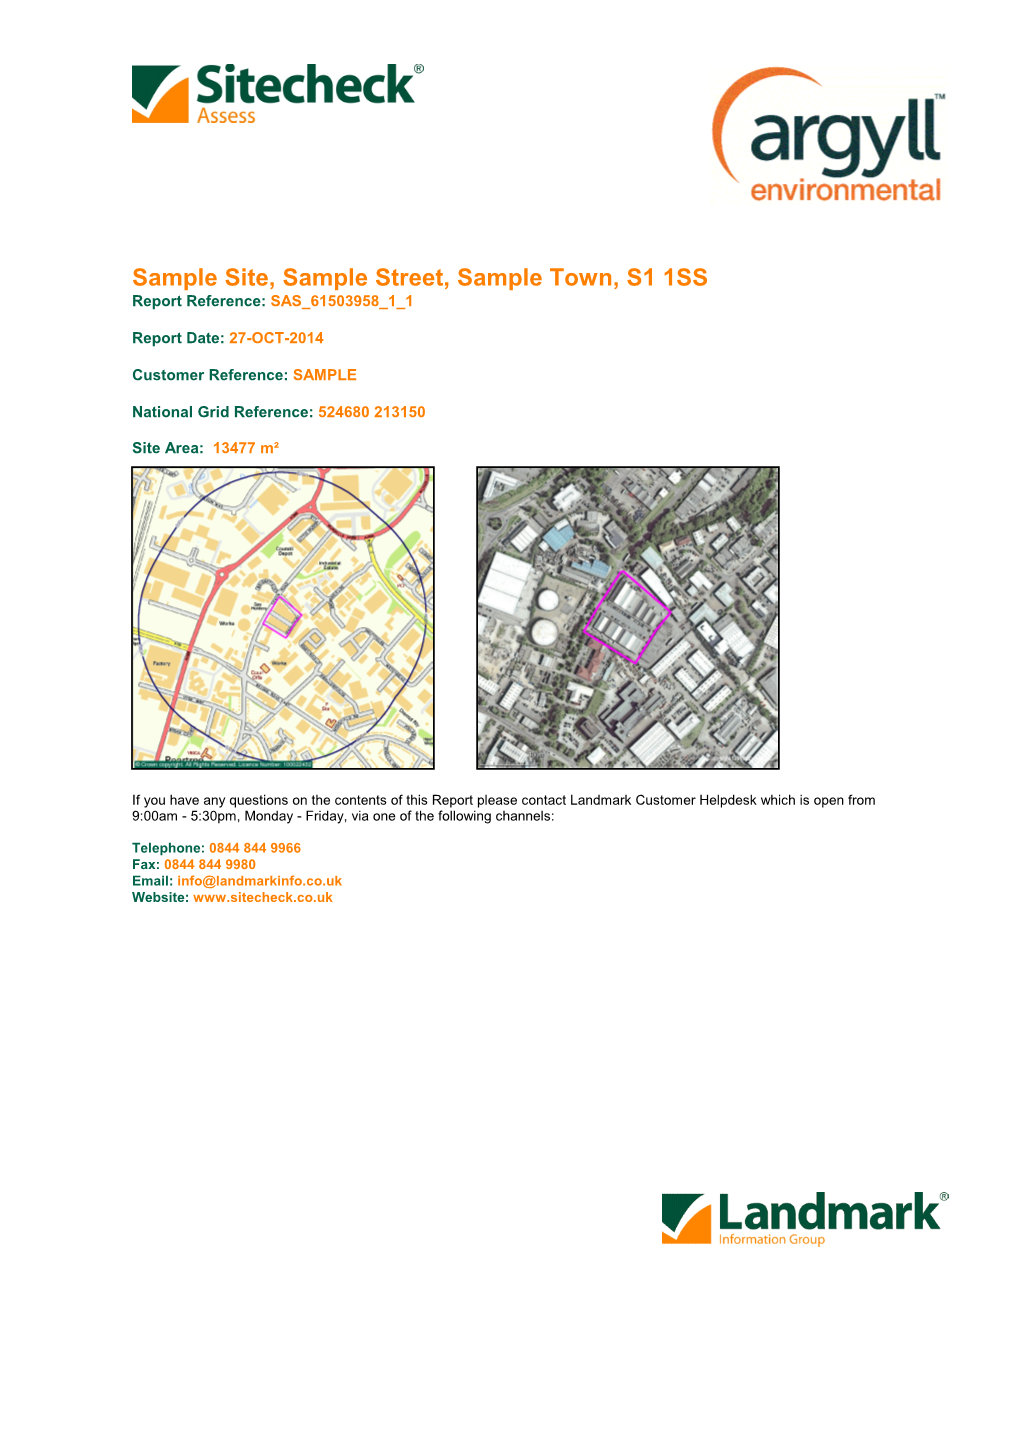 Sample Site, Sample Street, Sample Town, S1 1SS Report Reference: SAS 61503958 1 1